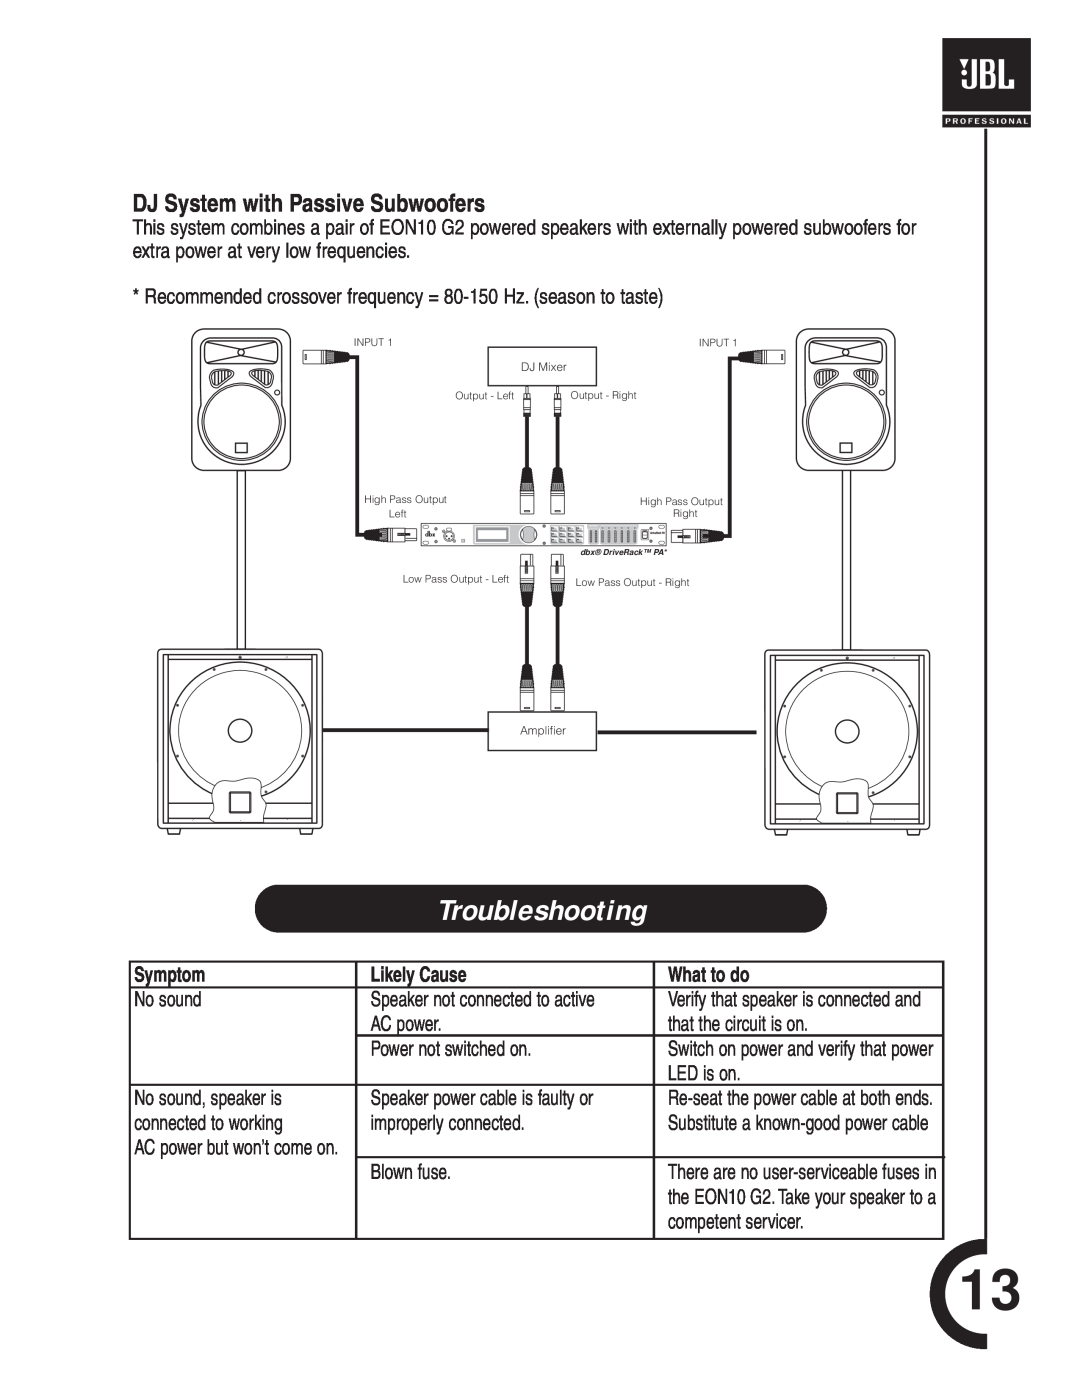 JBL Professional G2 manual Troubleshooting, DJ System with Passive Subwoofers, Symptom, Likely Cause, What to do 